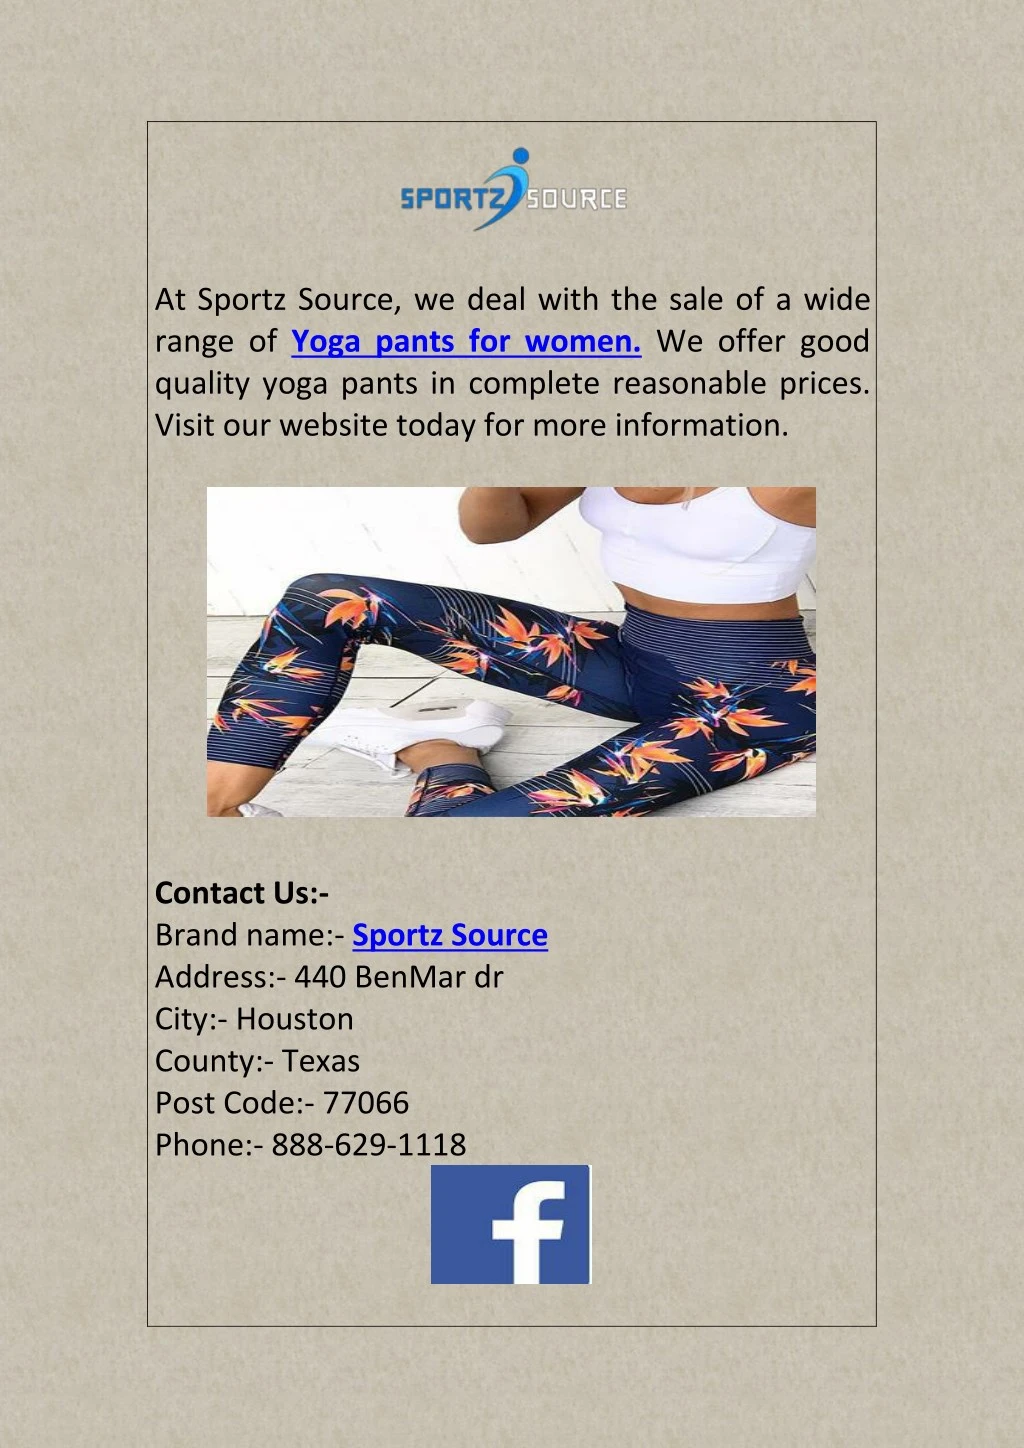 at sportz source we deal with the sale of a wide